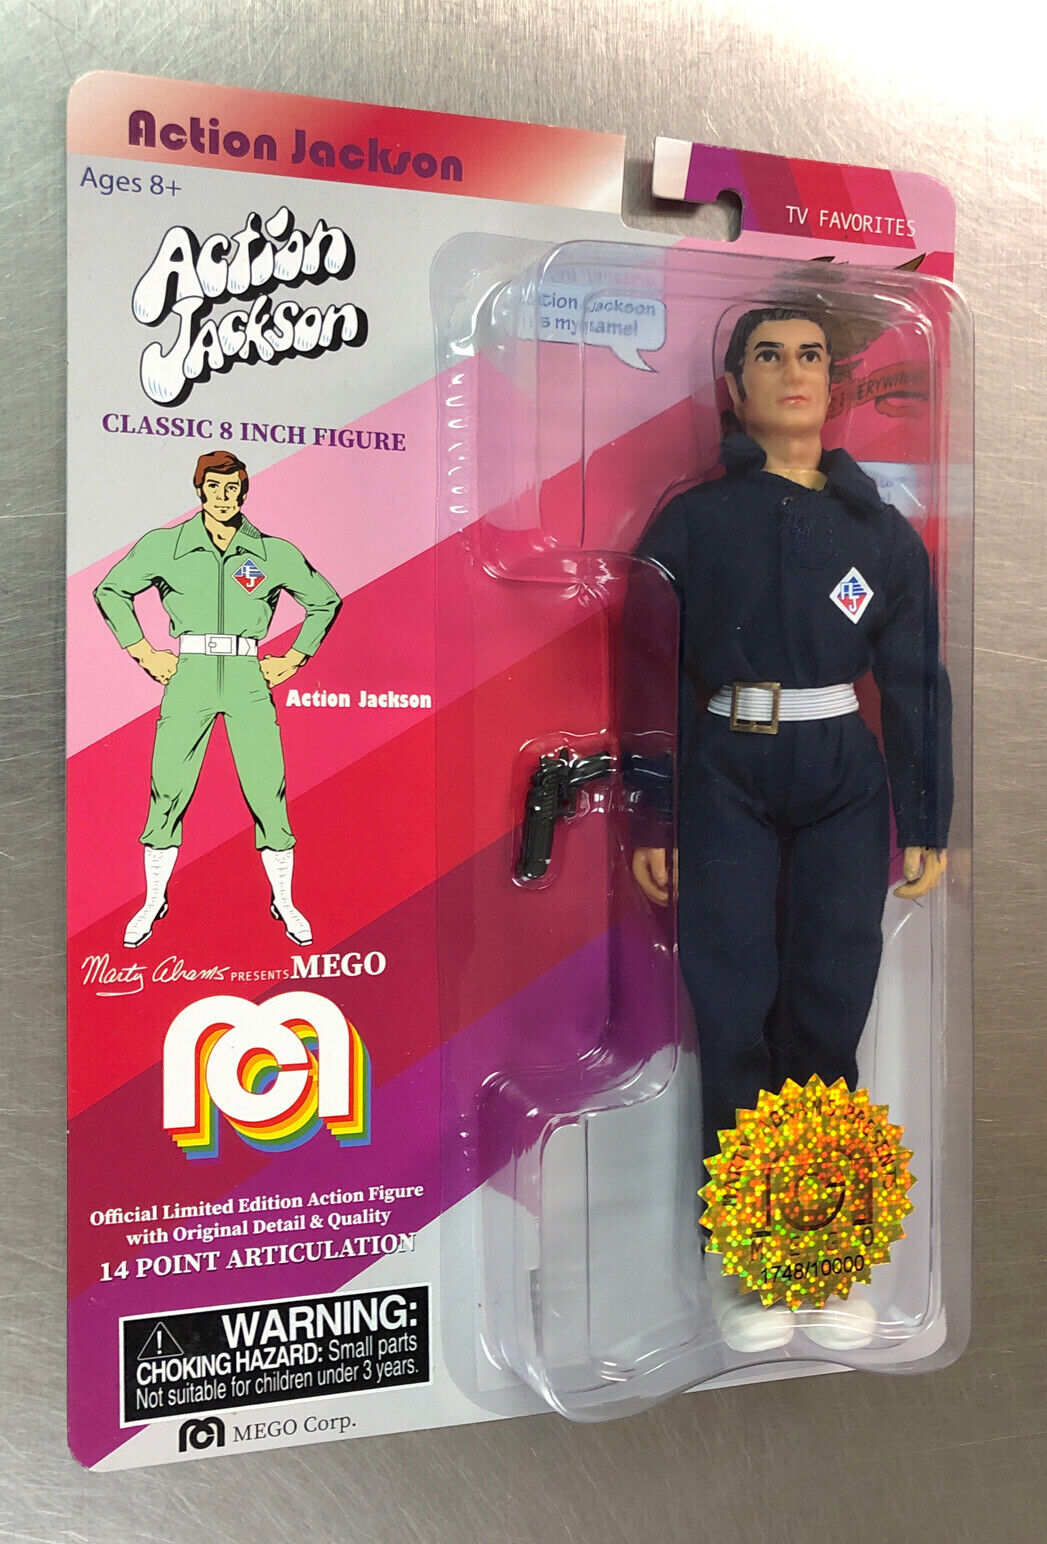 MARTY ABRAMS MEGO TV FAVORITES ACTION JACKSON #1748 OF 10000 8” ACTION FIGURE